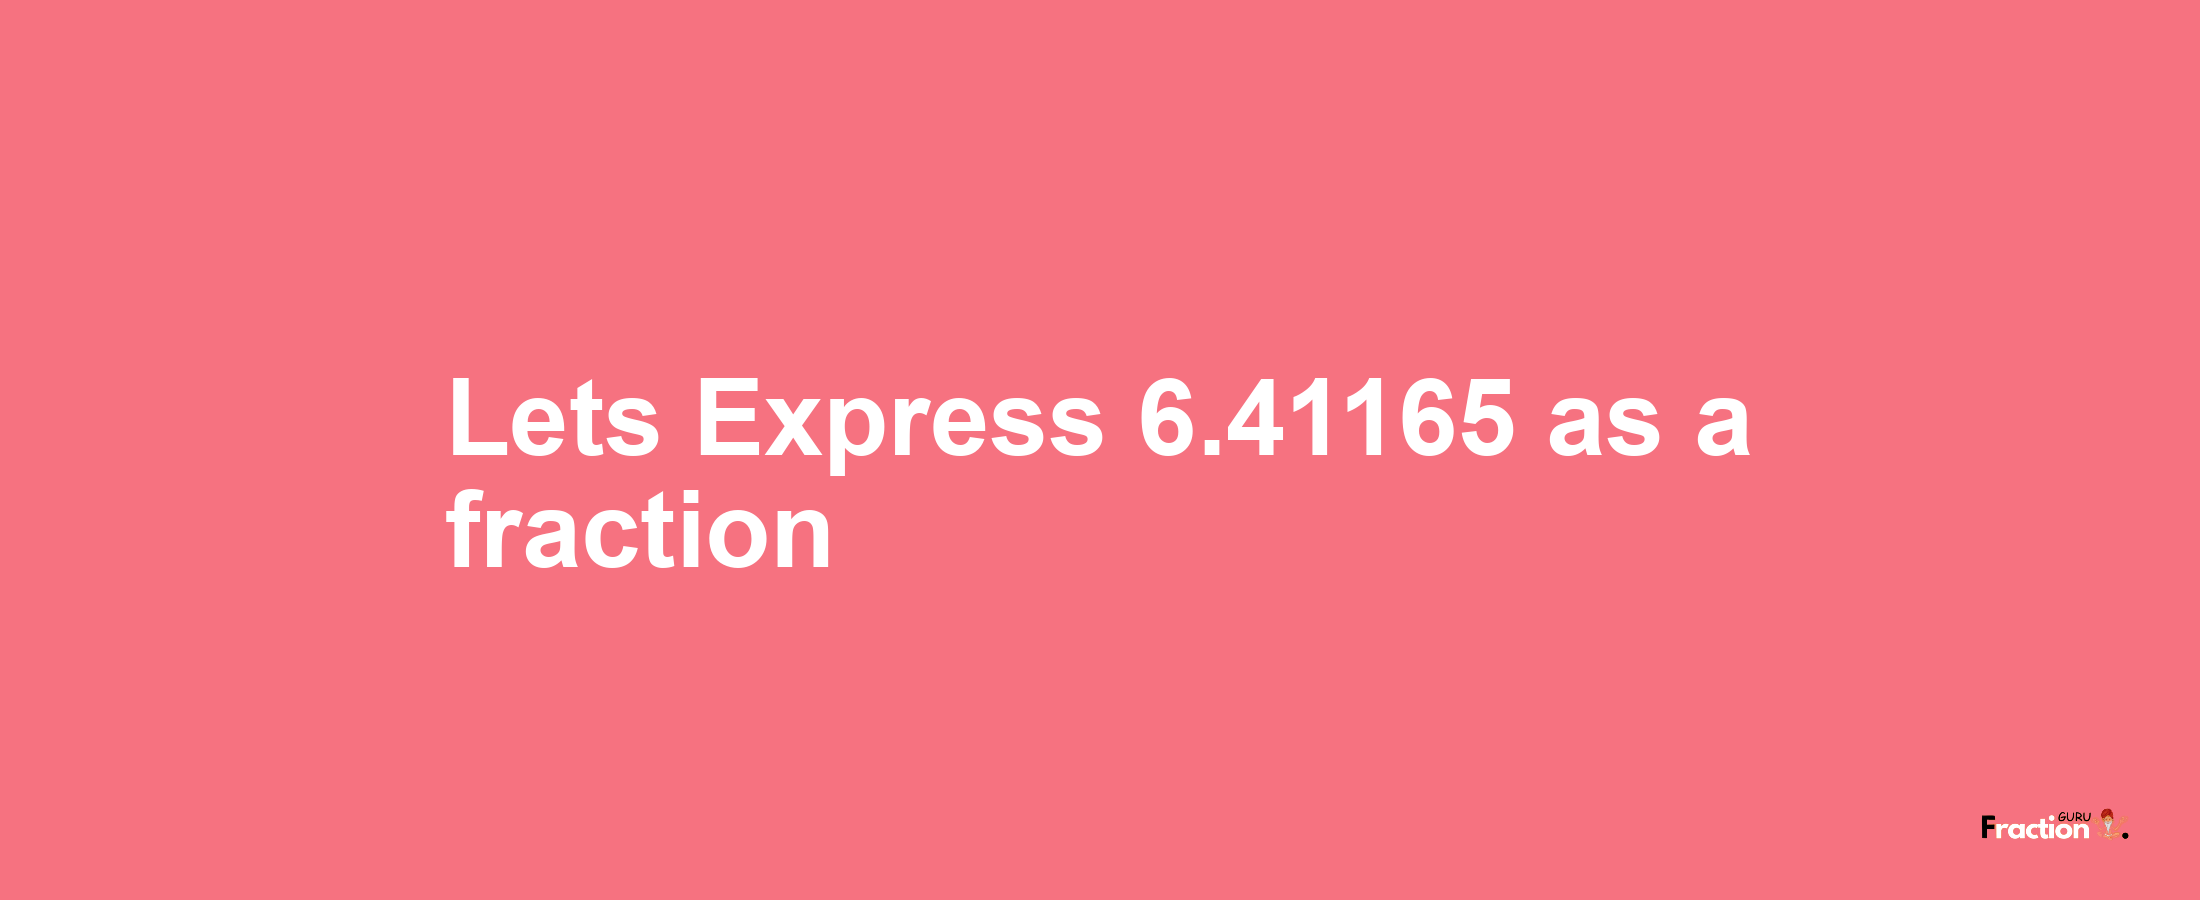 Lets Express 6.41165 as afraction